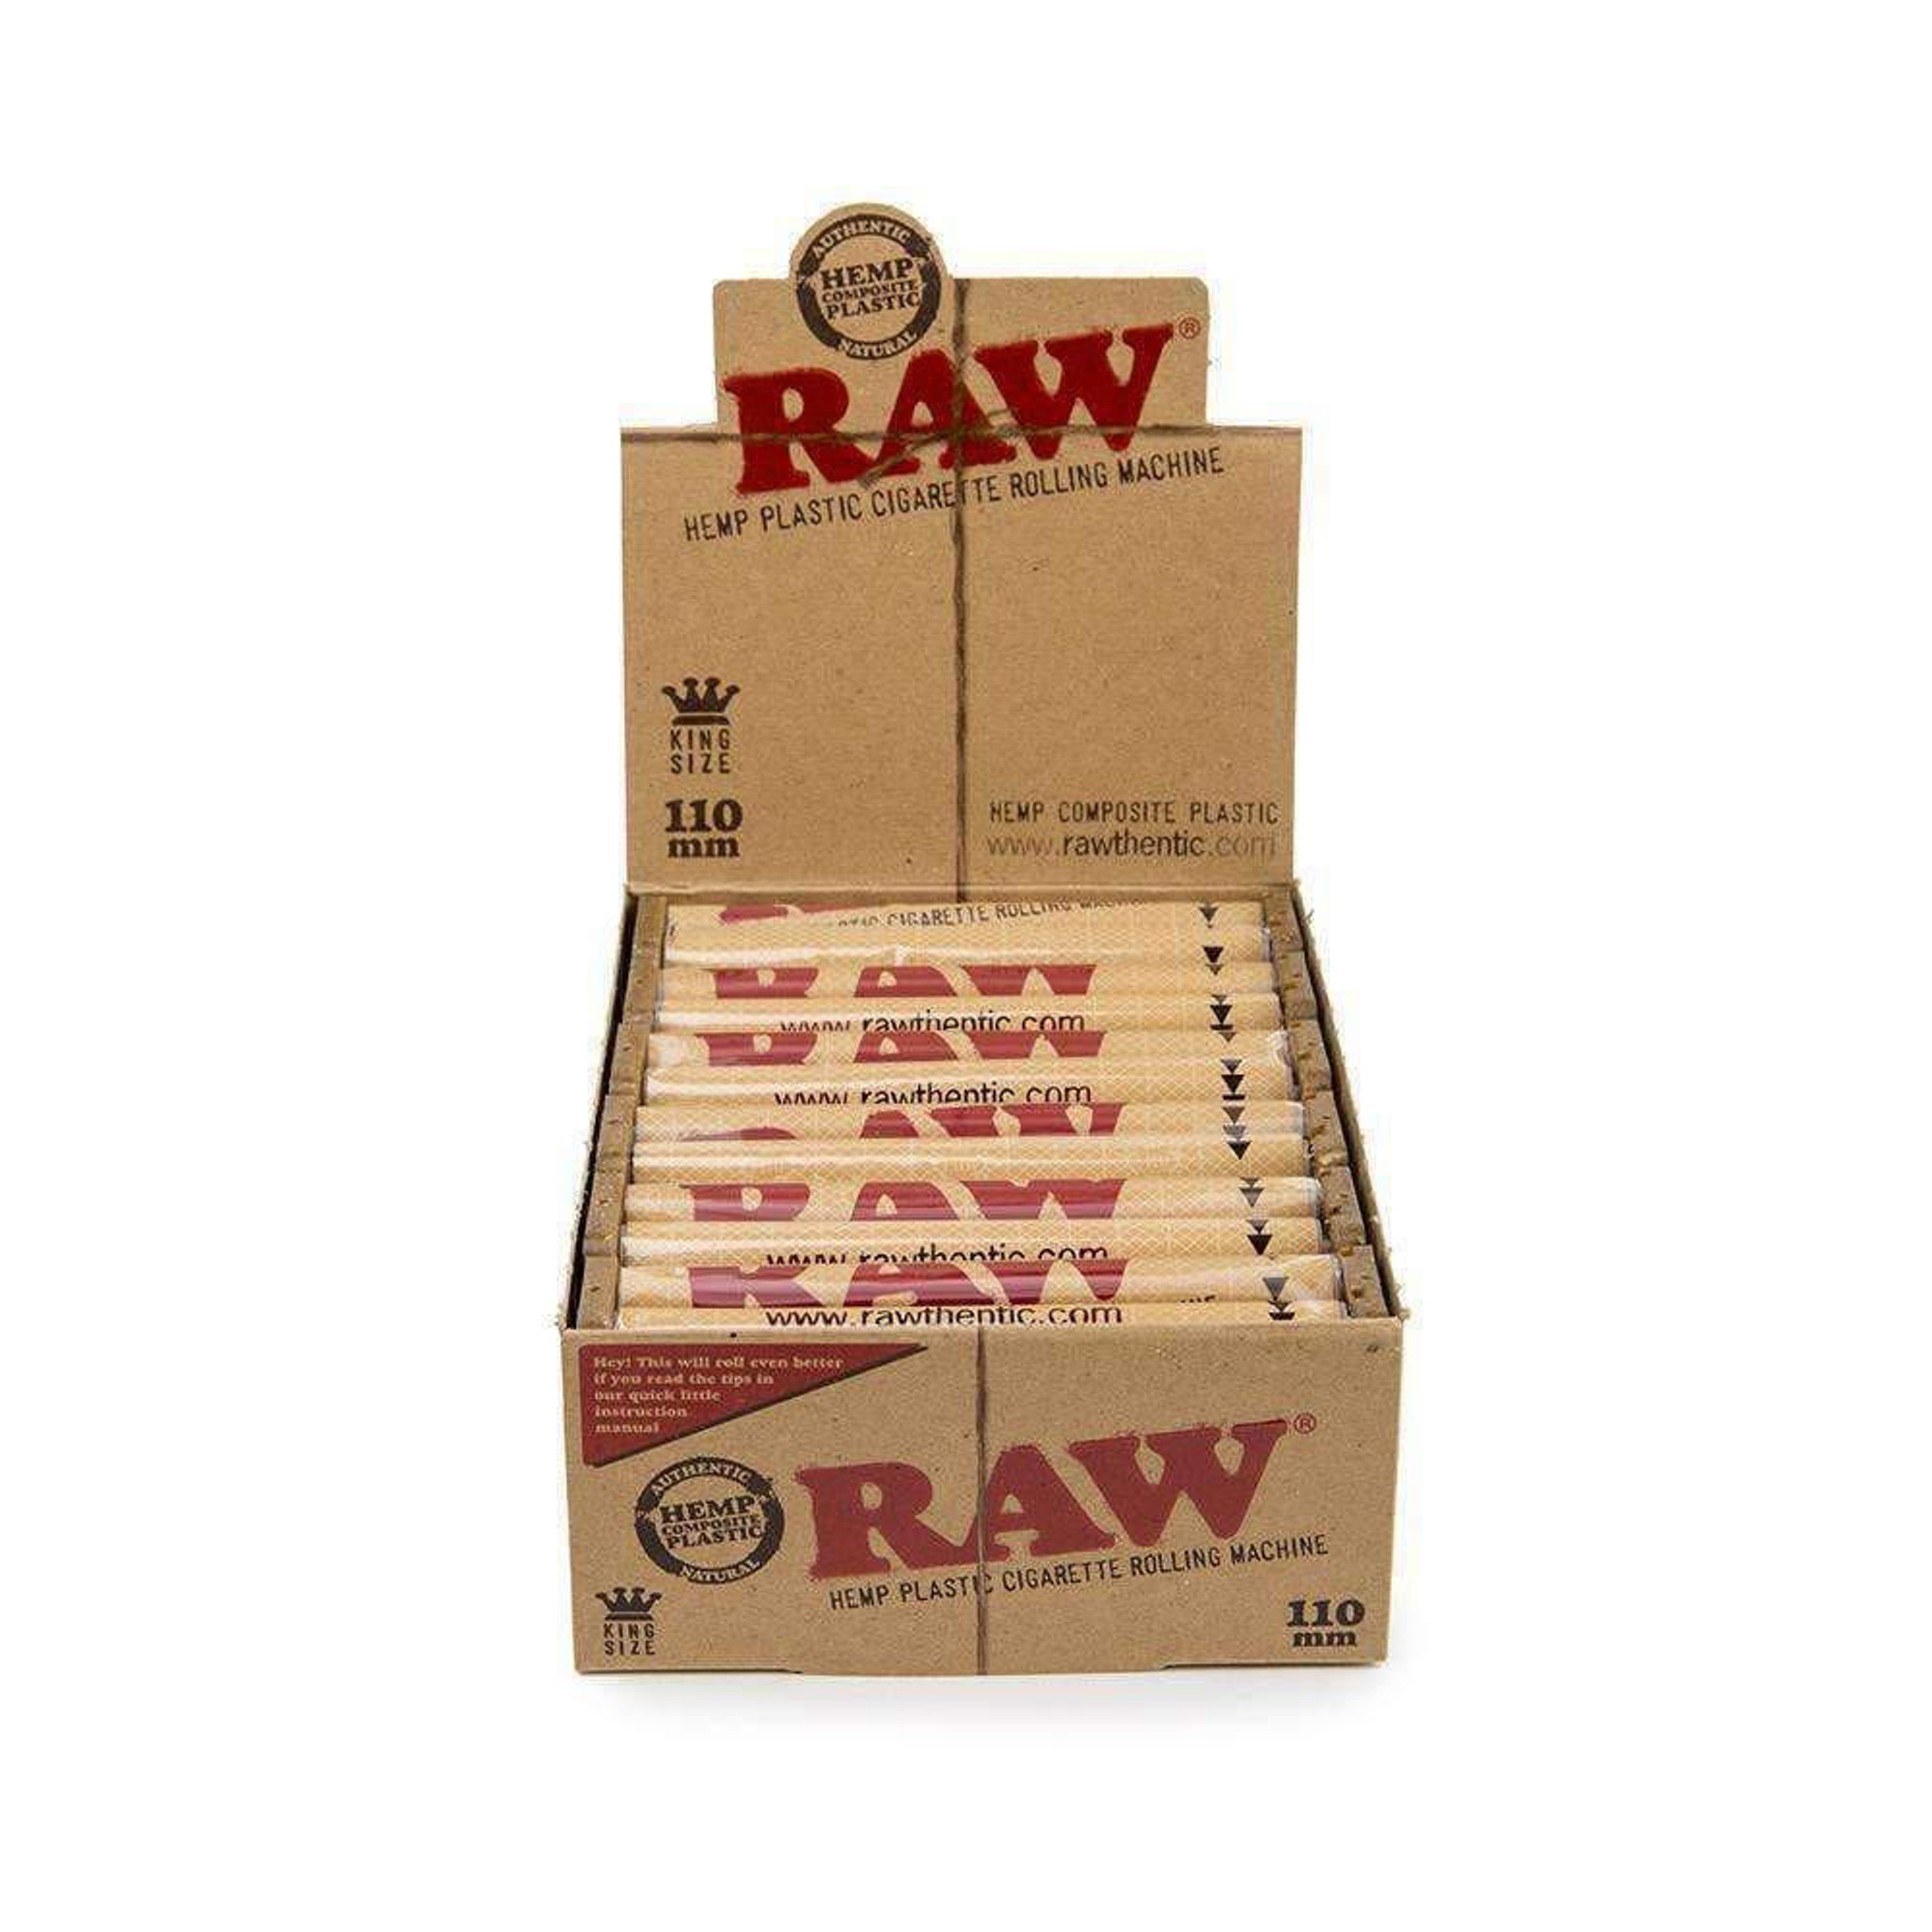 Raw Rolling Papers, Cones, Trays, Rollers, and More